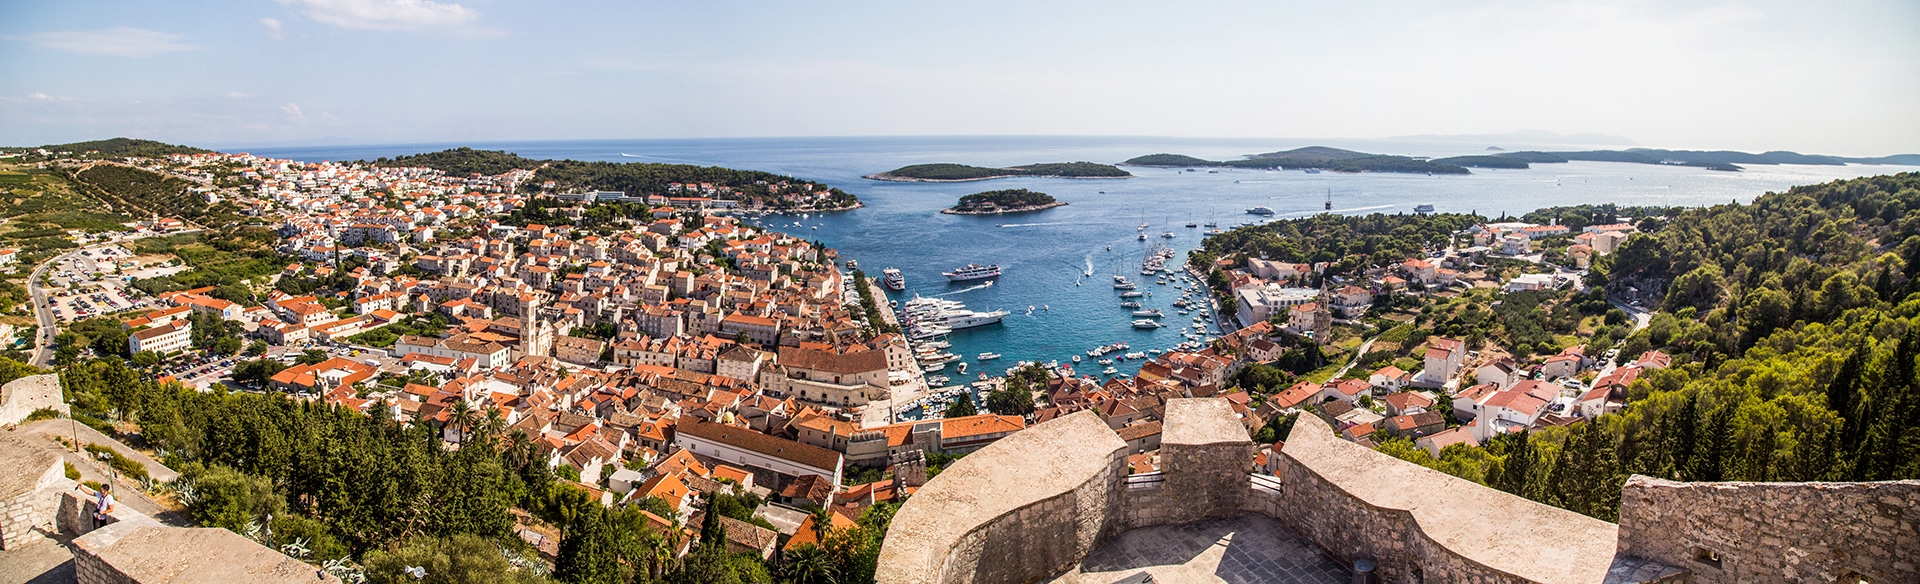 Aerial view of Hvar, Croatia, showing a stone overlook, red roofs far below and small cruise ships, yachts and islets in the harbor.